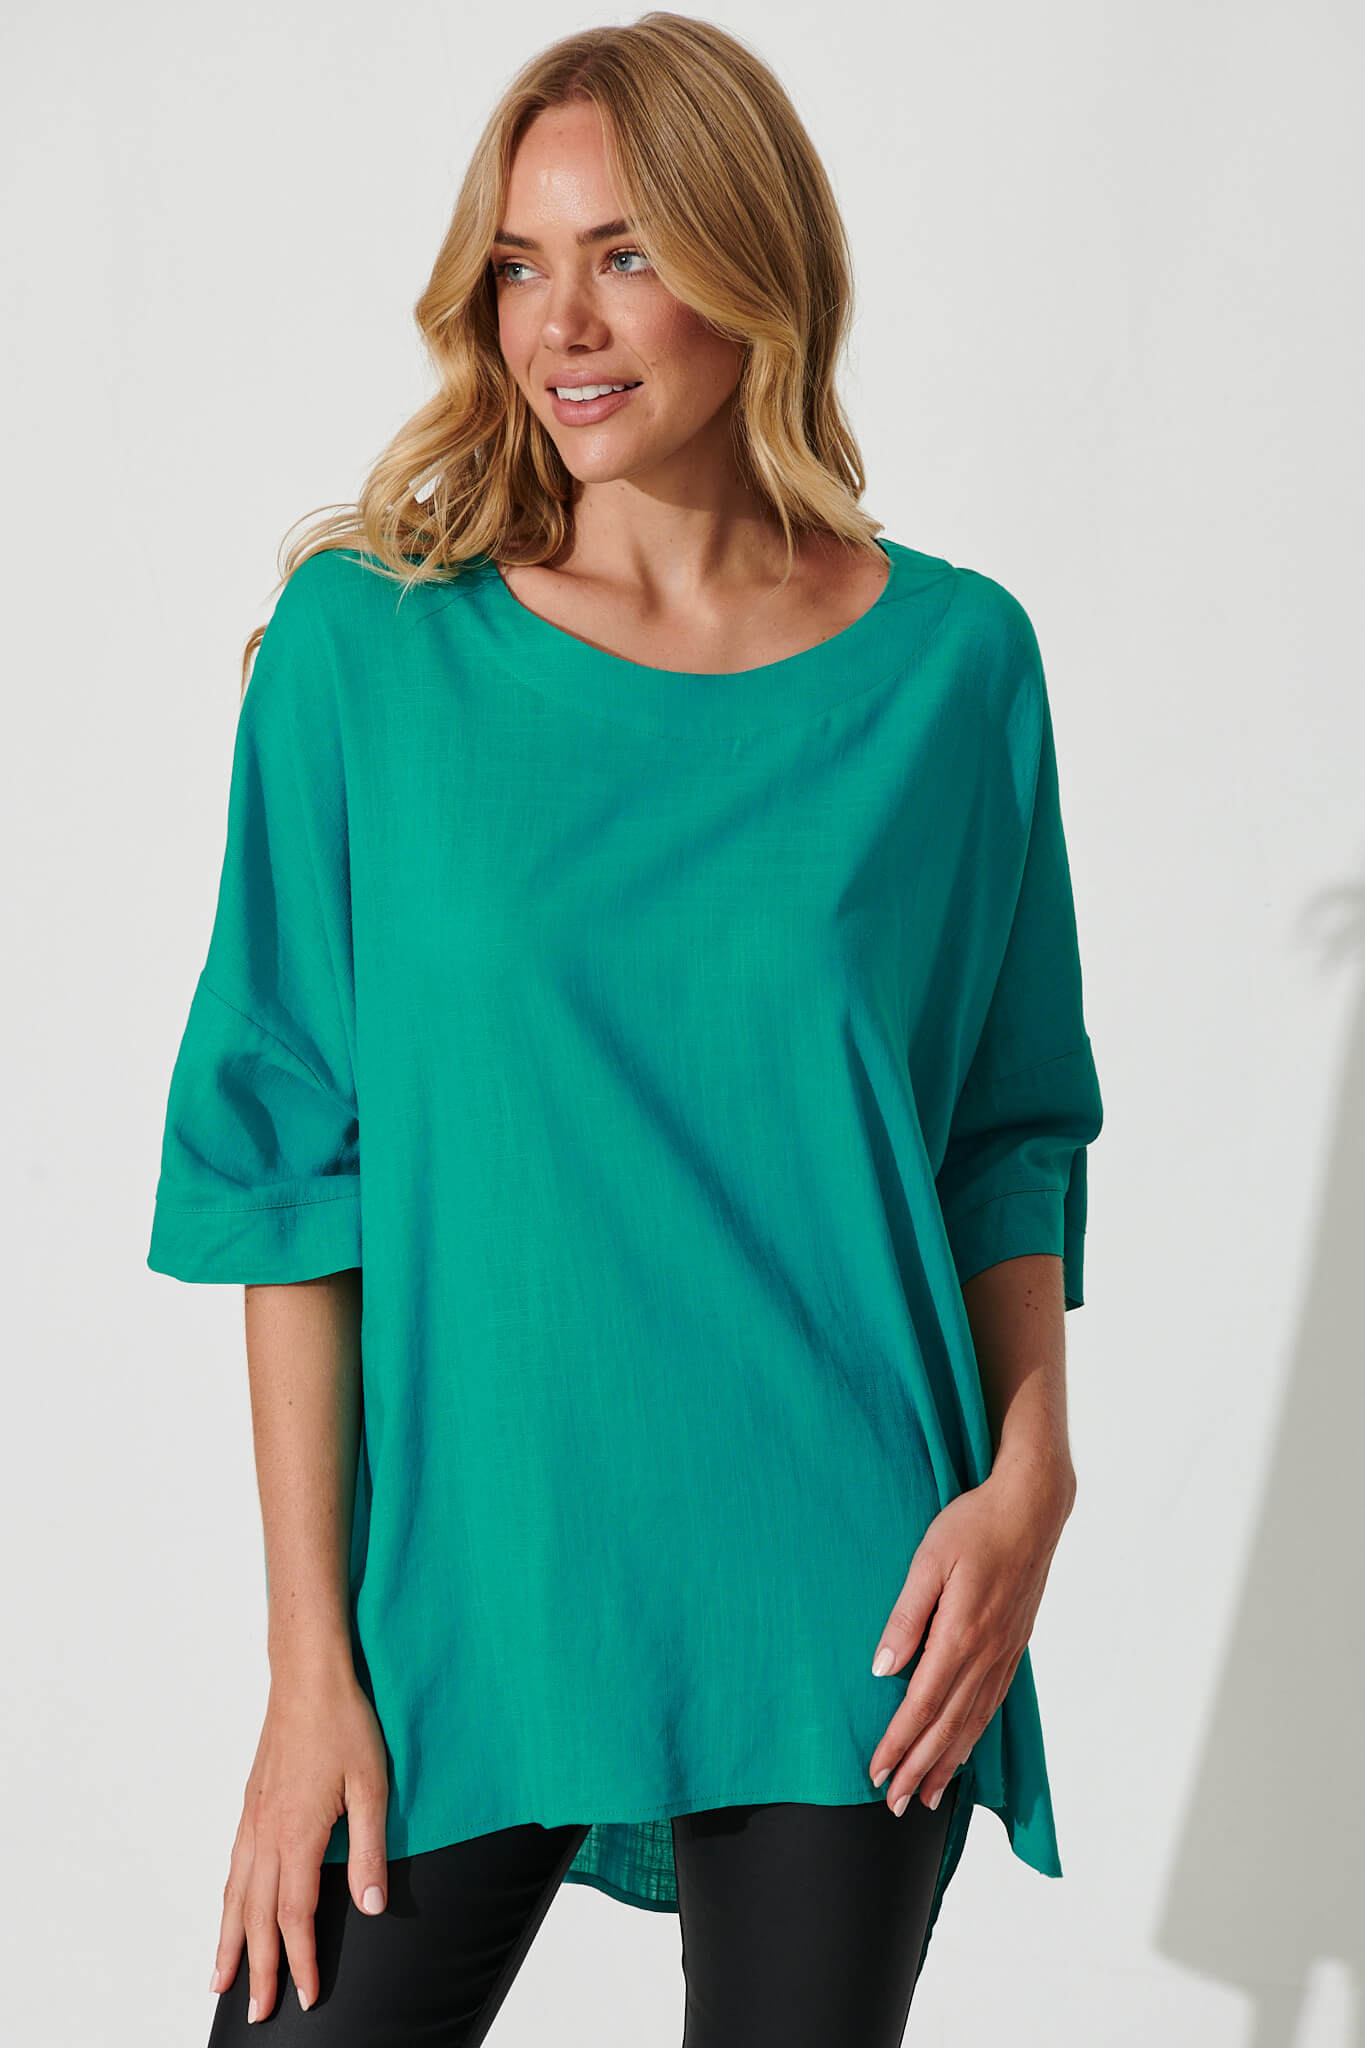 Vice Top In Teal Linen Blend - front